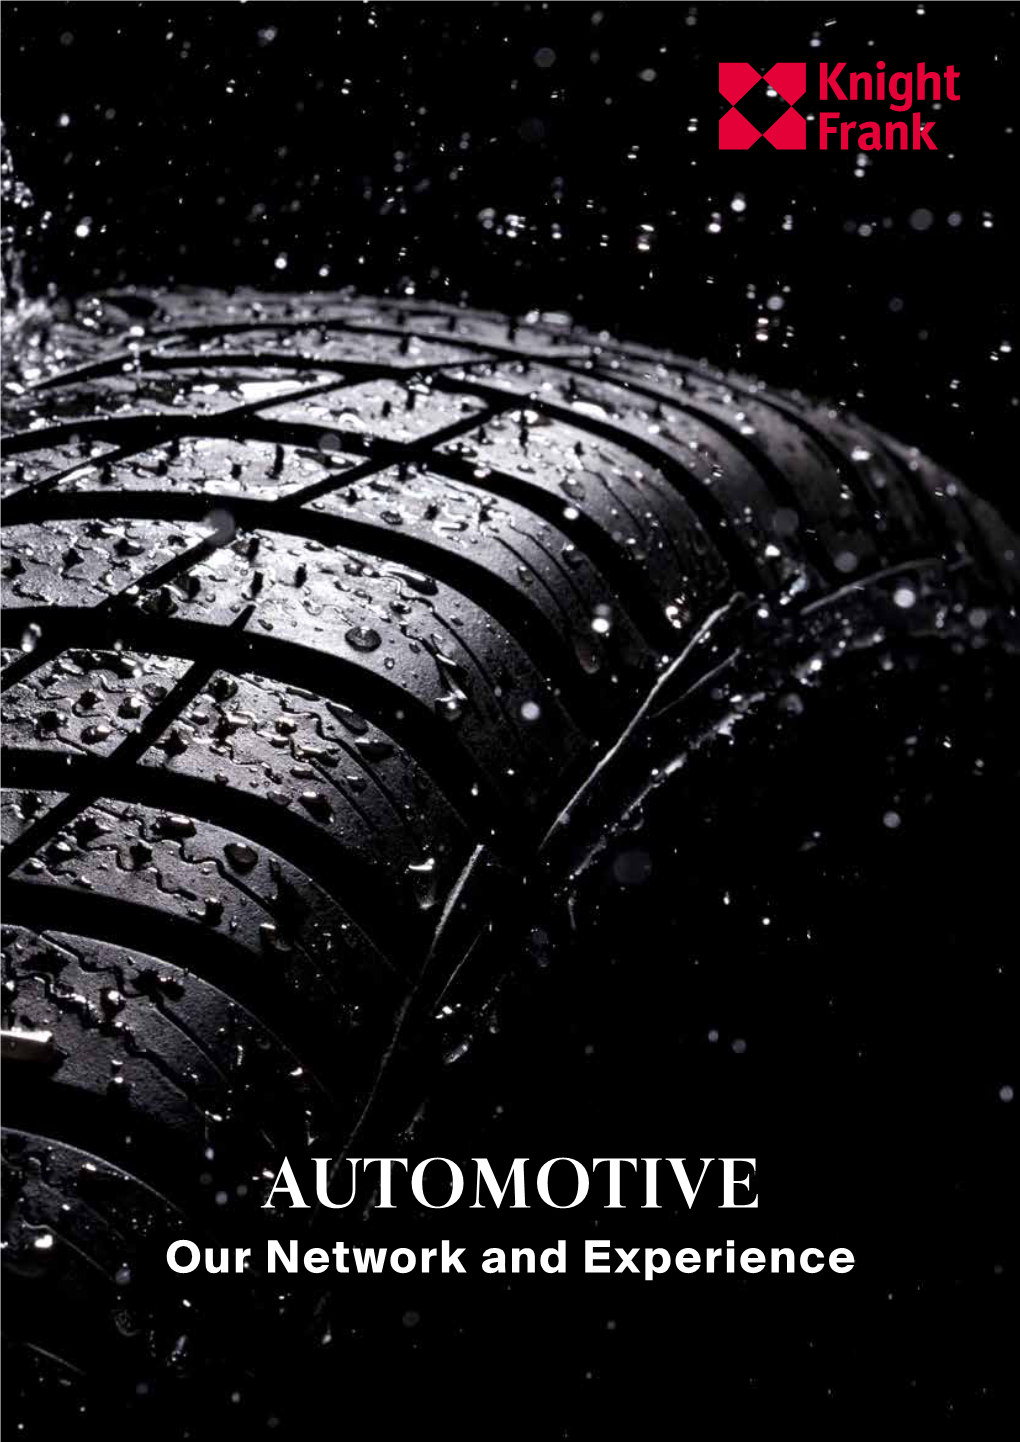 Knight Frank Automotive Brochure Our Network and Experience Read More